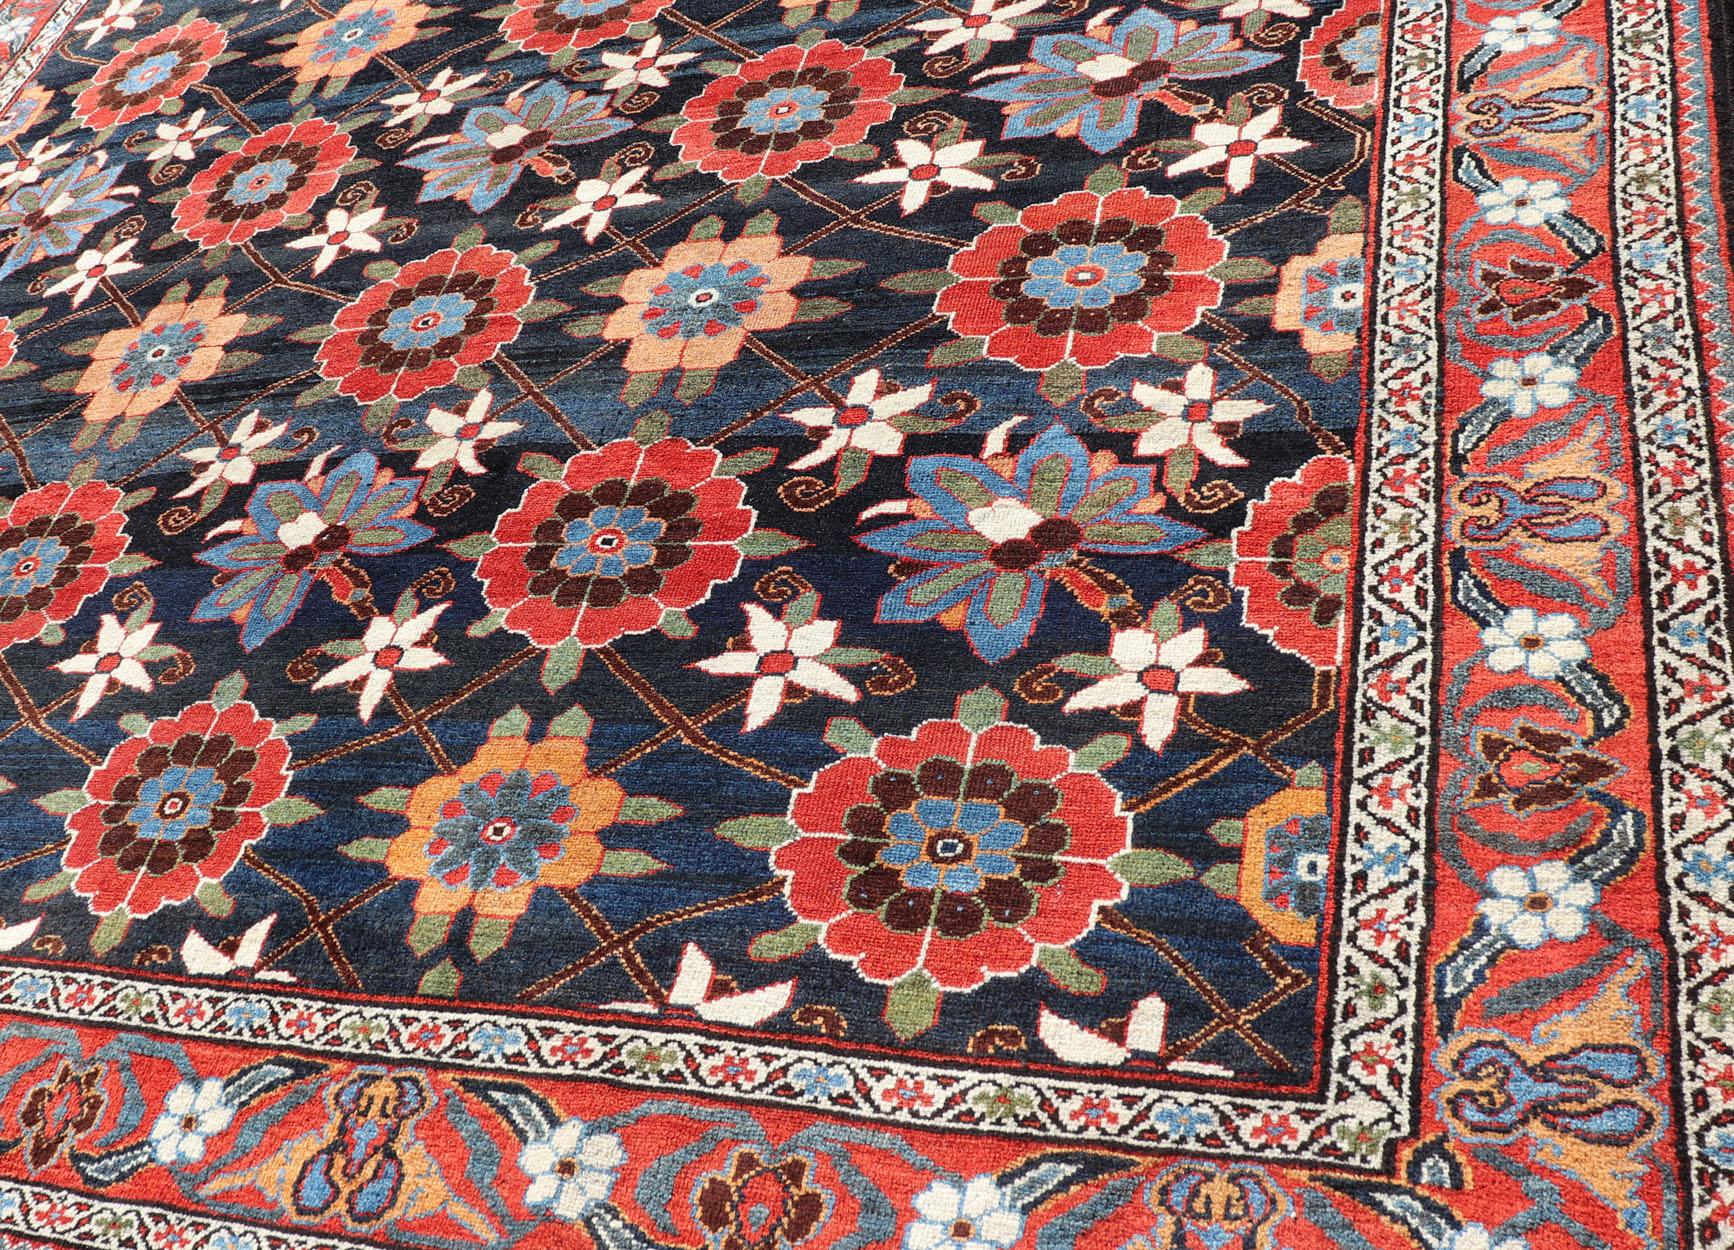 Malayer Wool Handknotted Antique Persian Gallery Bakhitari Rug in All-Over Floral Design For Sale